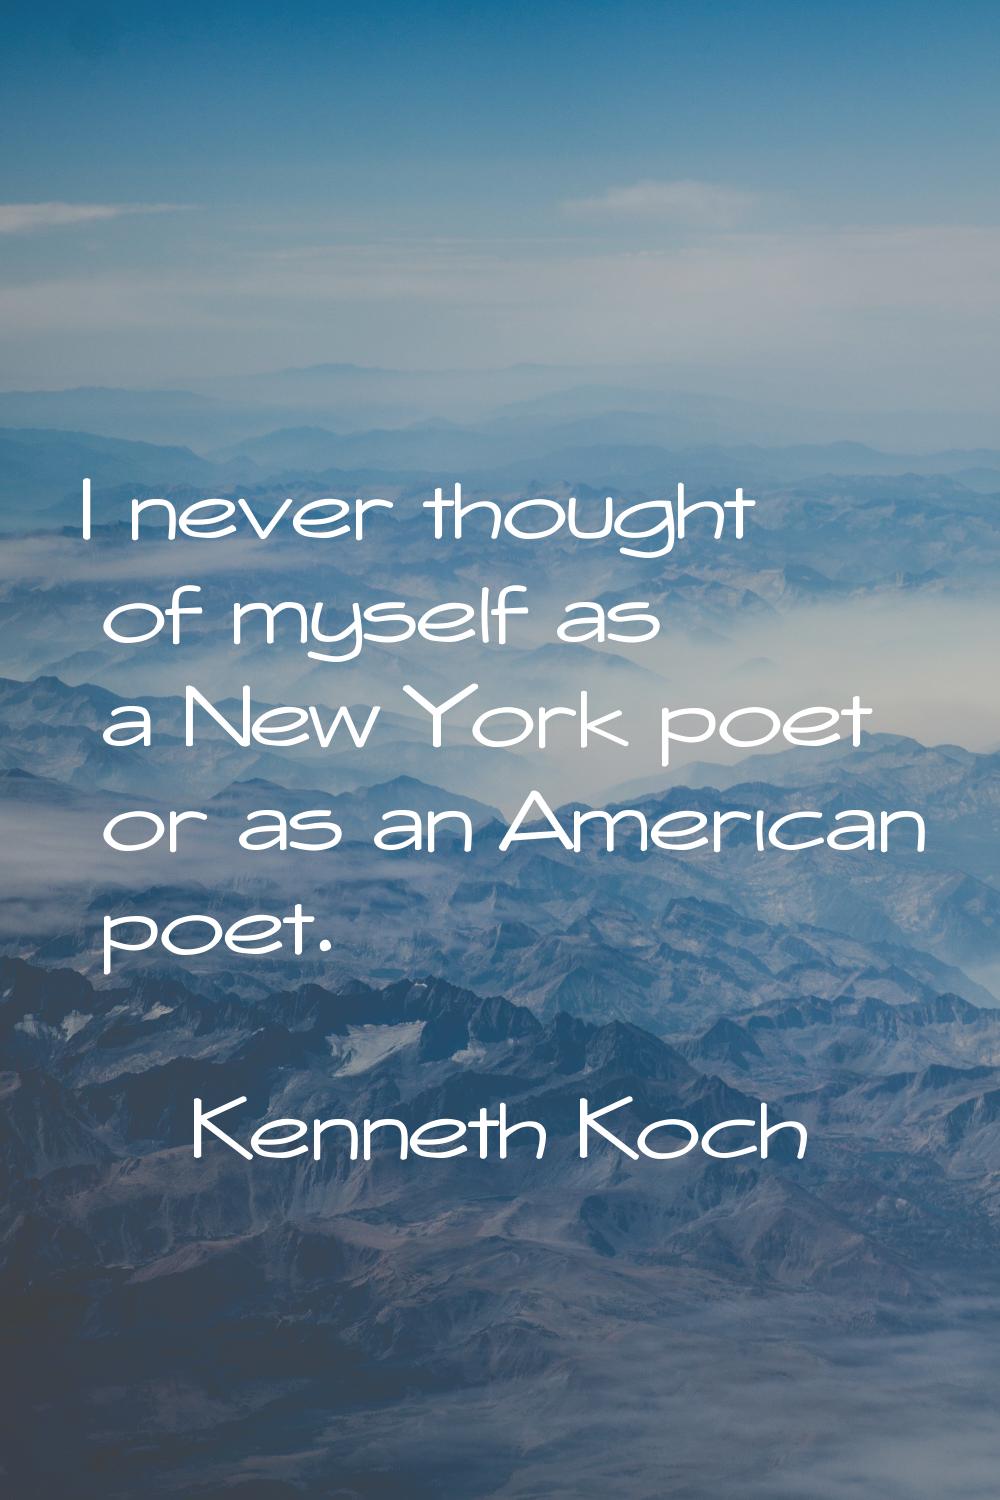 I never thought of myself as a New York poet or as an American poet.